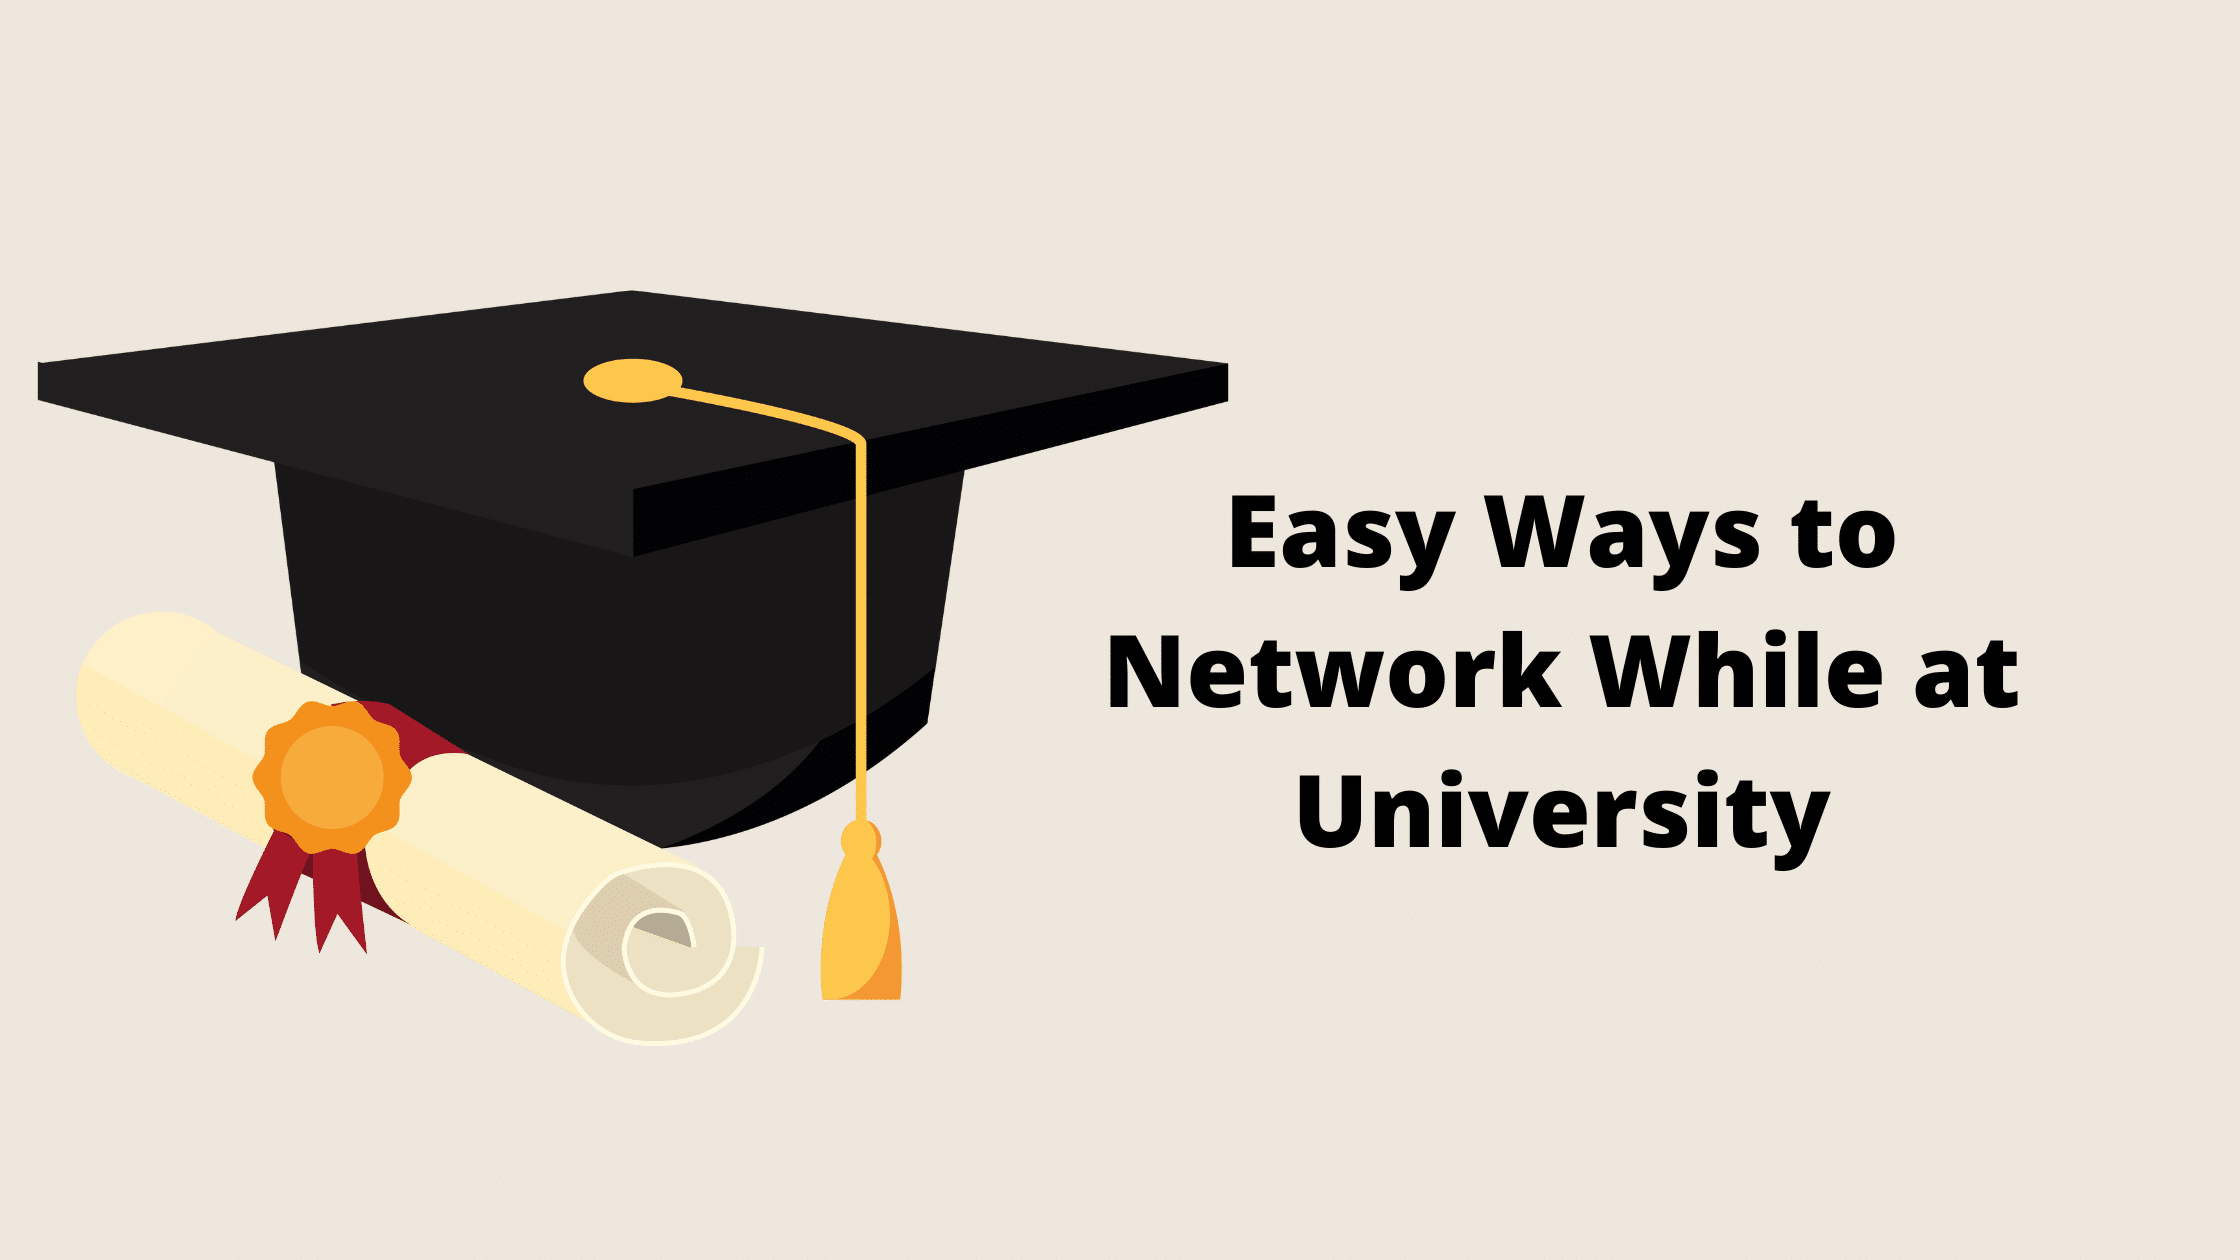 5 Easy Ways to Network While at University